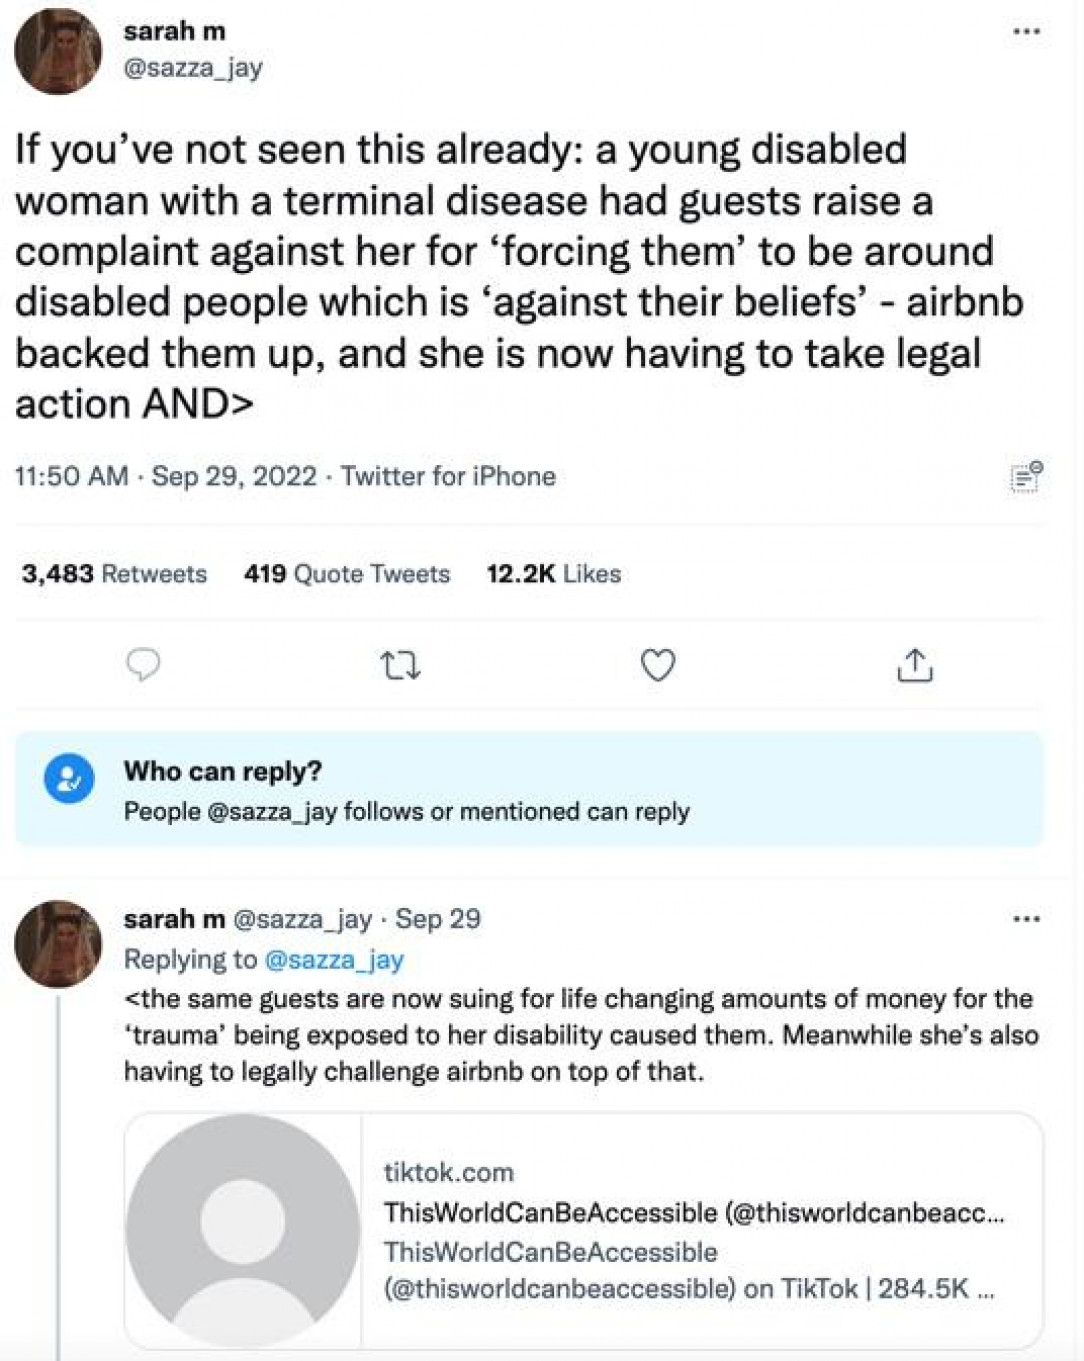 AirBnb Host in Ireland is being sued by guests for being disabled